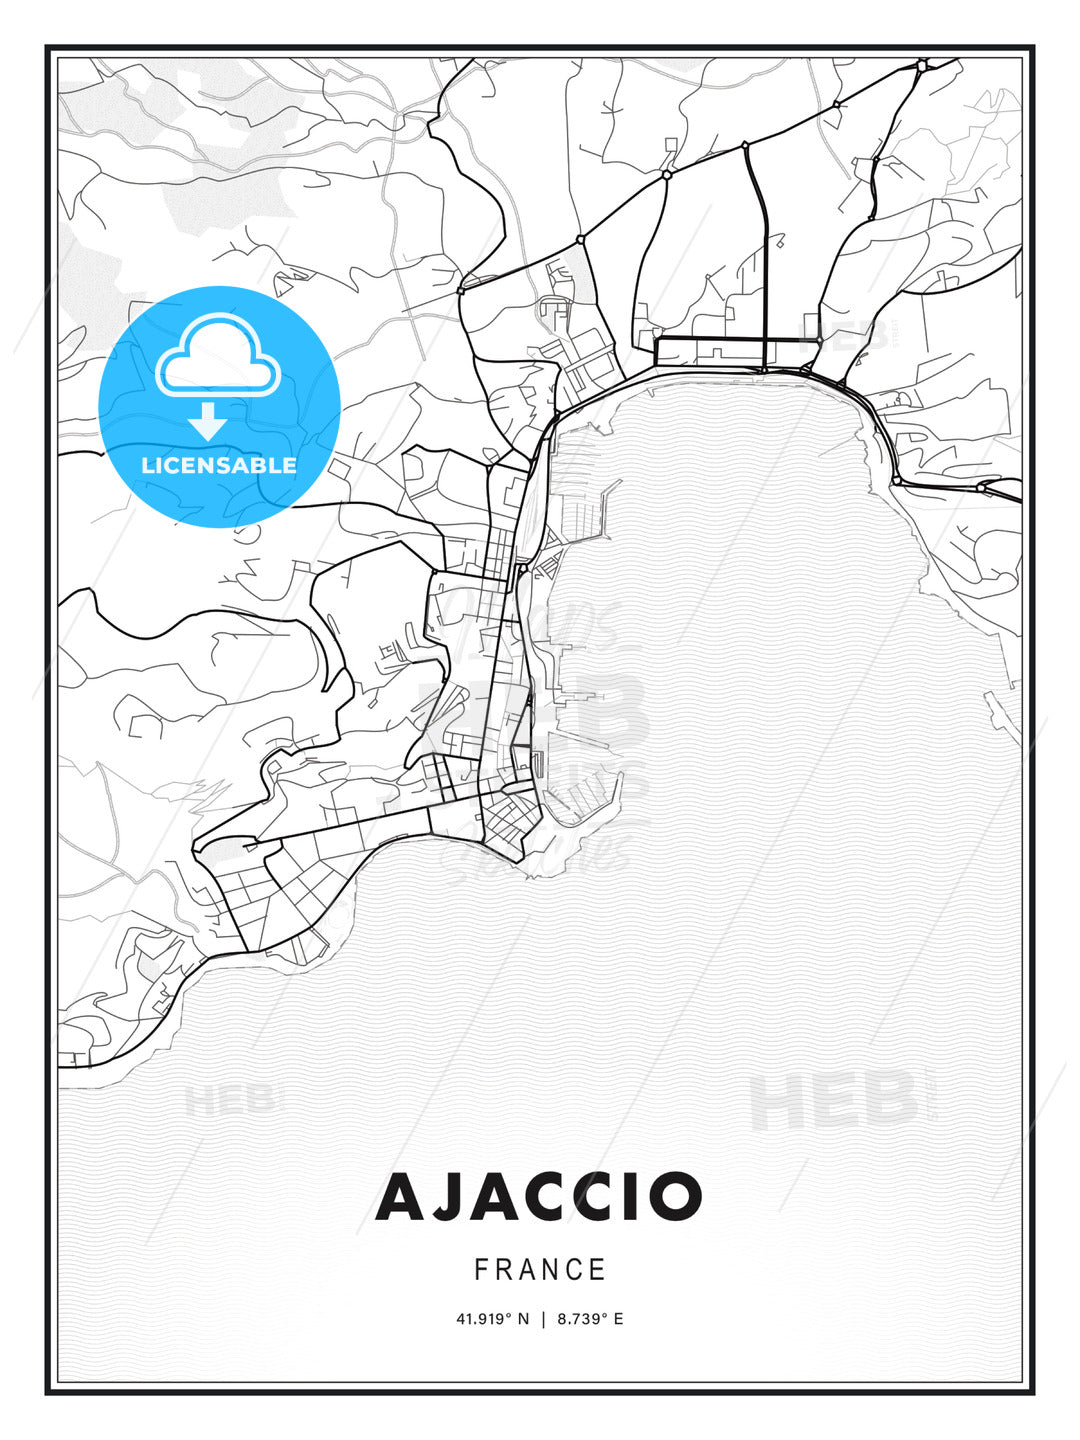 Ajaccio, France, Modern Print Template in Various Formats - HEBSTREITS Sketches